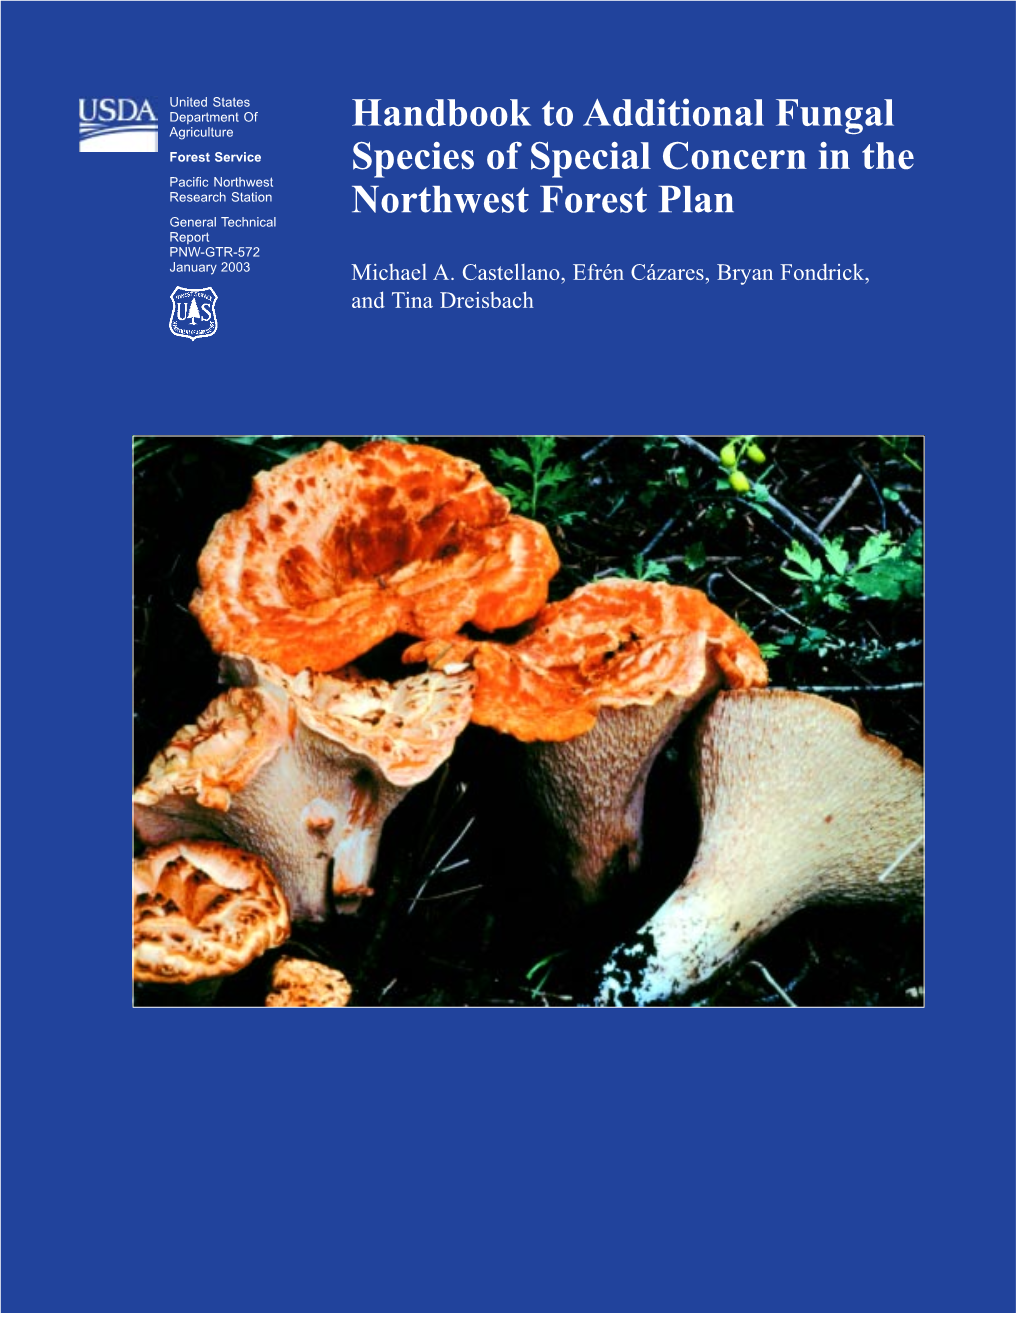 Handbook to Additional Fungal Species of Special Concern in the Northwest Forest Plan